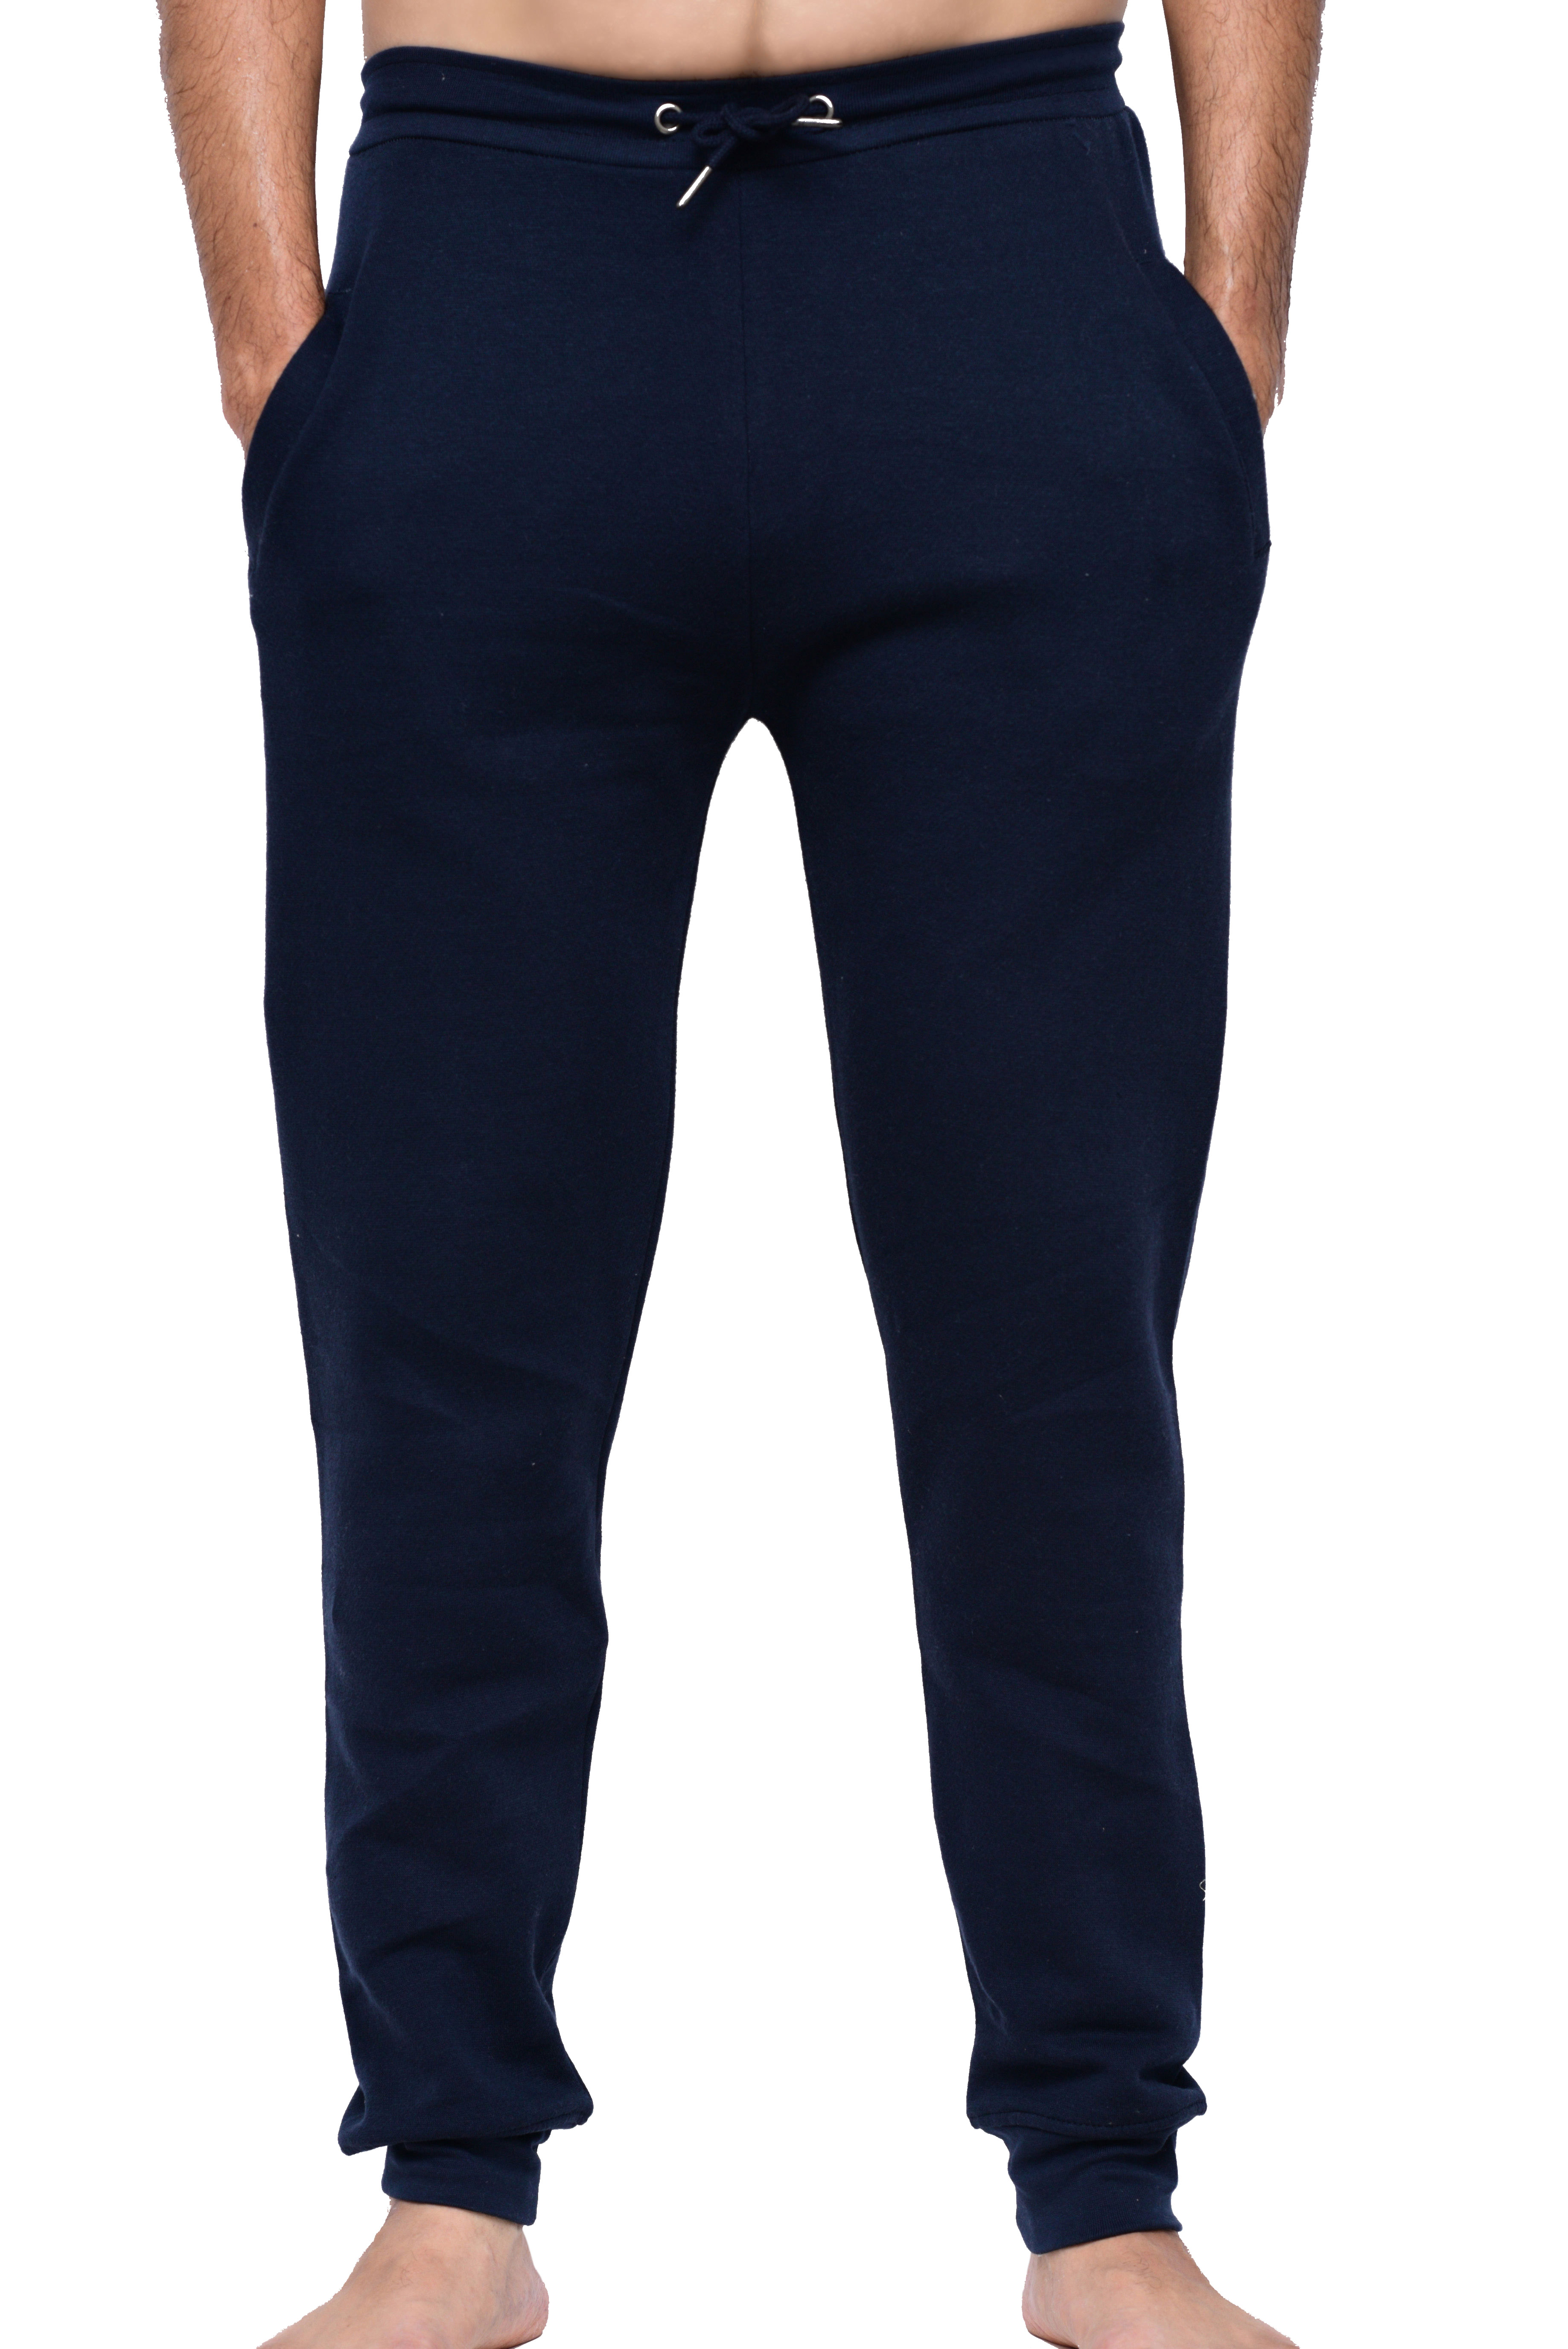 Milltex Adult Mid Weight Classic Jogger Pants | Portage Promotionals